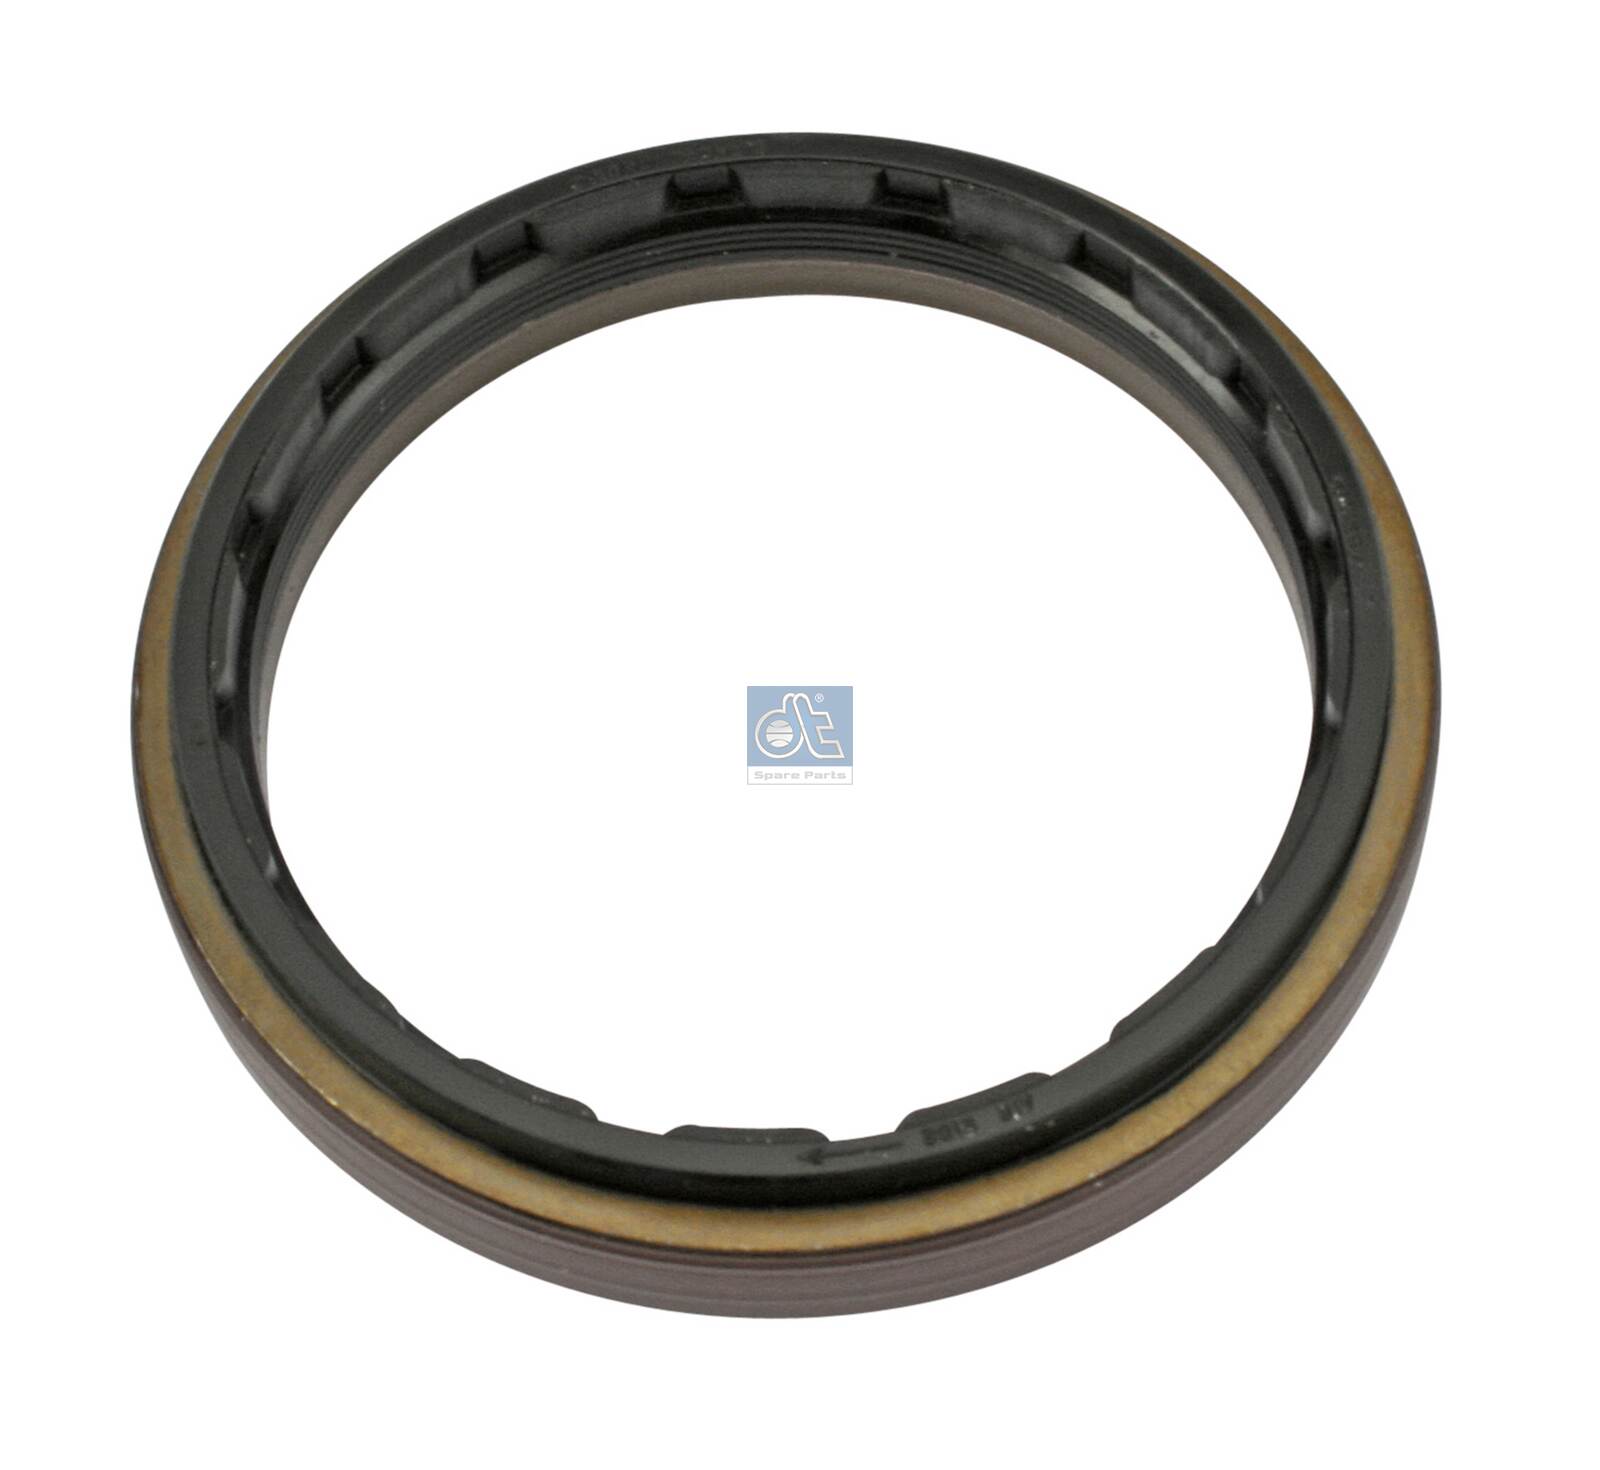 1.16047, Shaft Seal, differential, DT Spare Parts, 1383129, 1386594, 1502385, 502385, 041.144, 04.24.022, 120.147-00A, 12017403B, 12018653, 1249078, 139.483, 18796, 222.630, 520693, 69296, 74170362, 12018653B, 1250302, 139732, 18797, 3345, 63345, 82017403, 95649, 63345/1, 82018653, 95649DPH, 65199, 98061, 015674